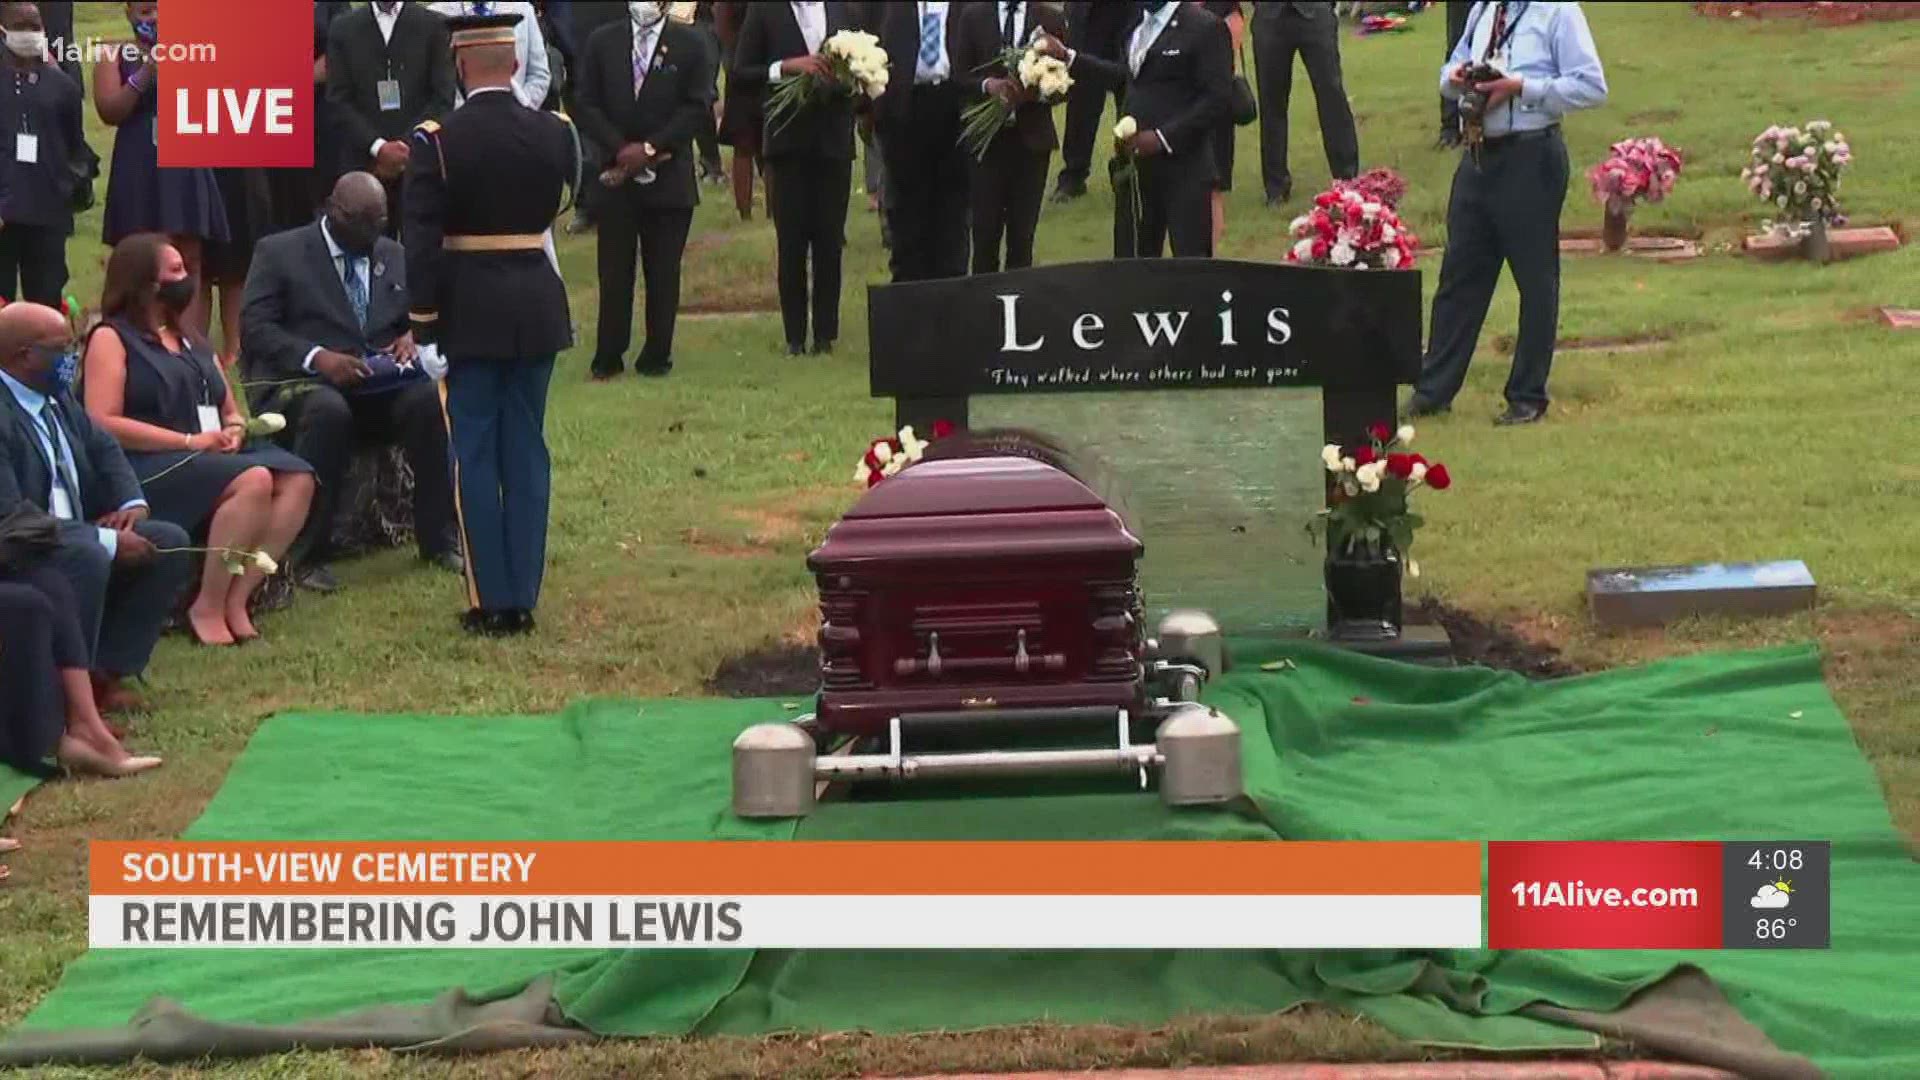 Lewis is being buried at South-View Cemetery.